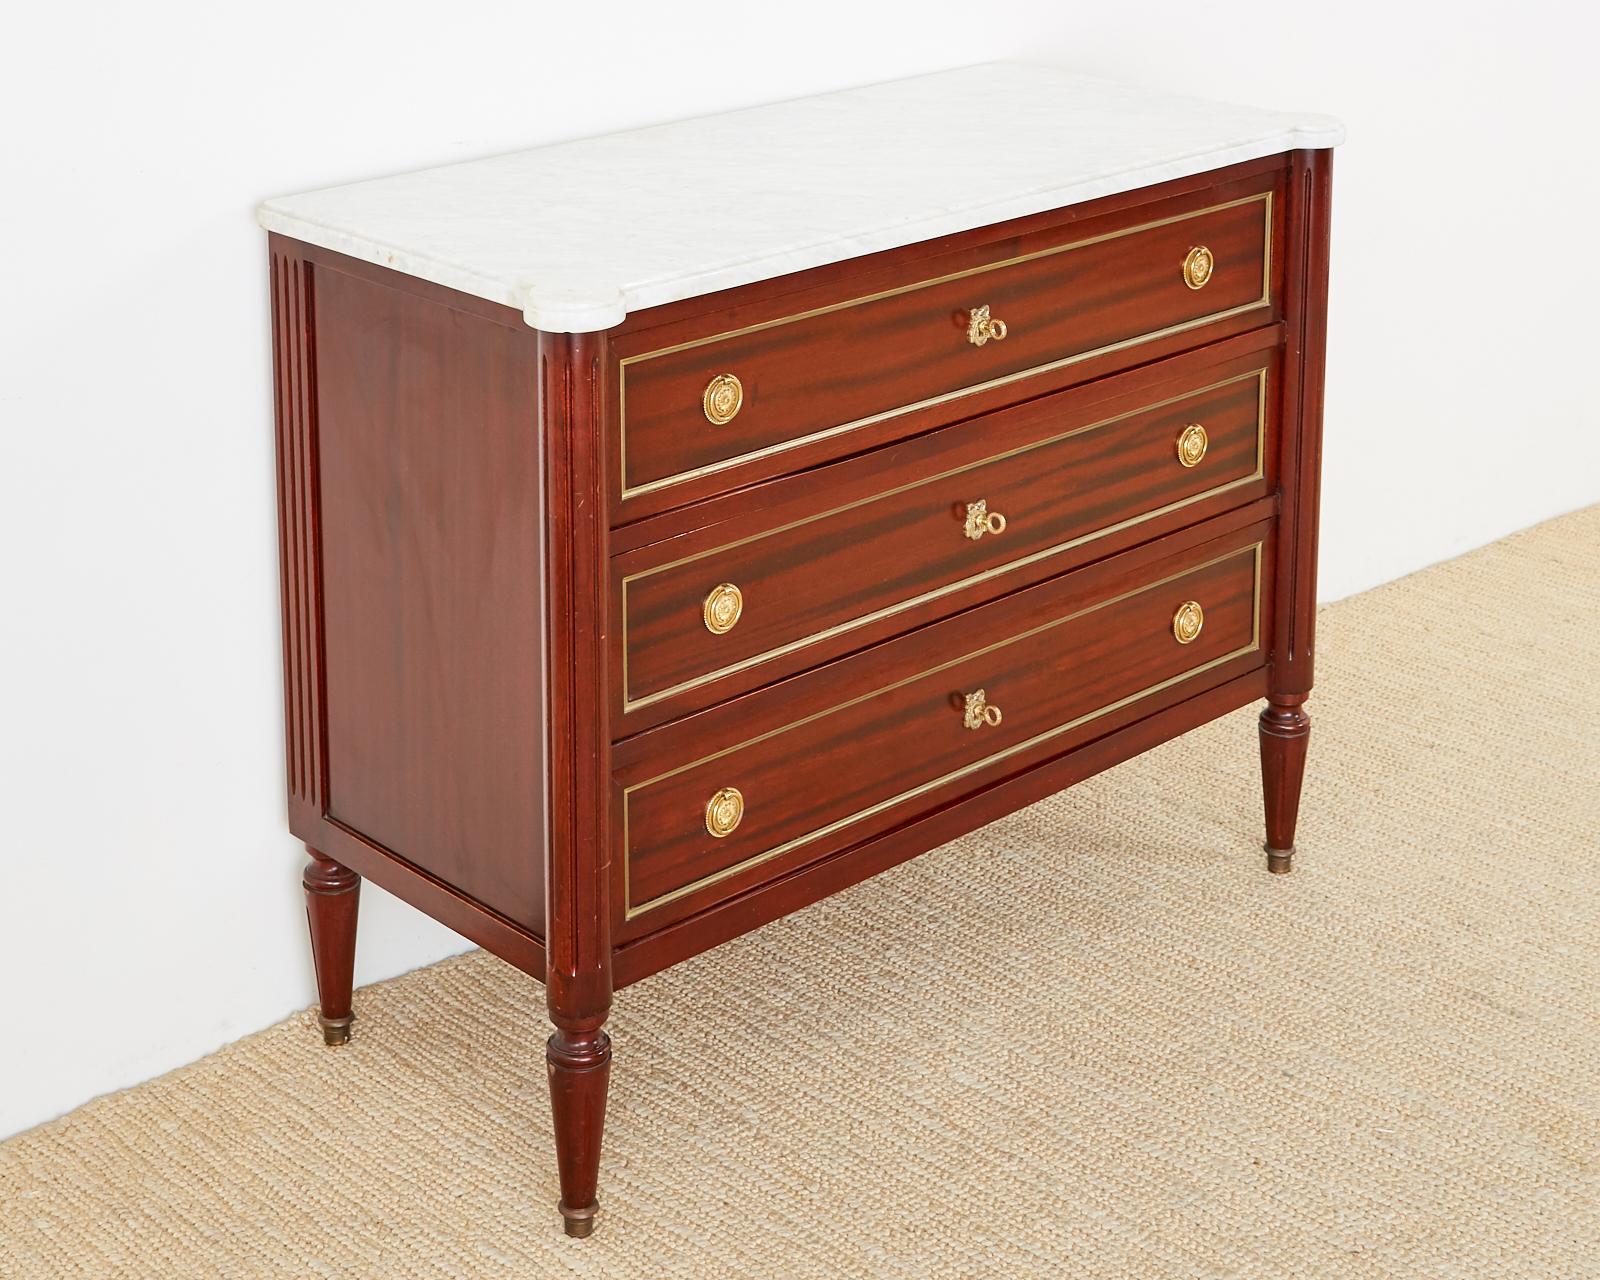 20th Century French Louis XVI Style Mahogany Marble-Top Commode Dresser 